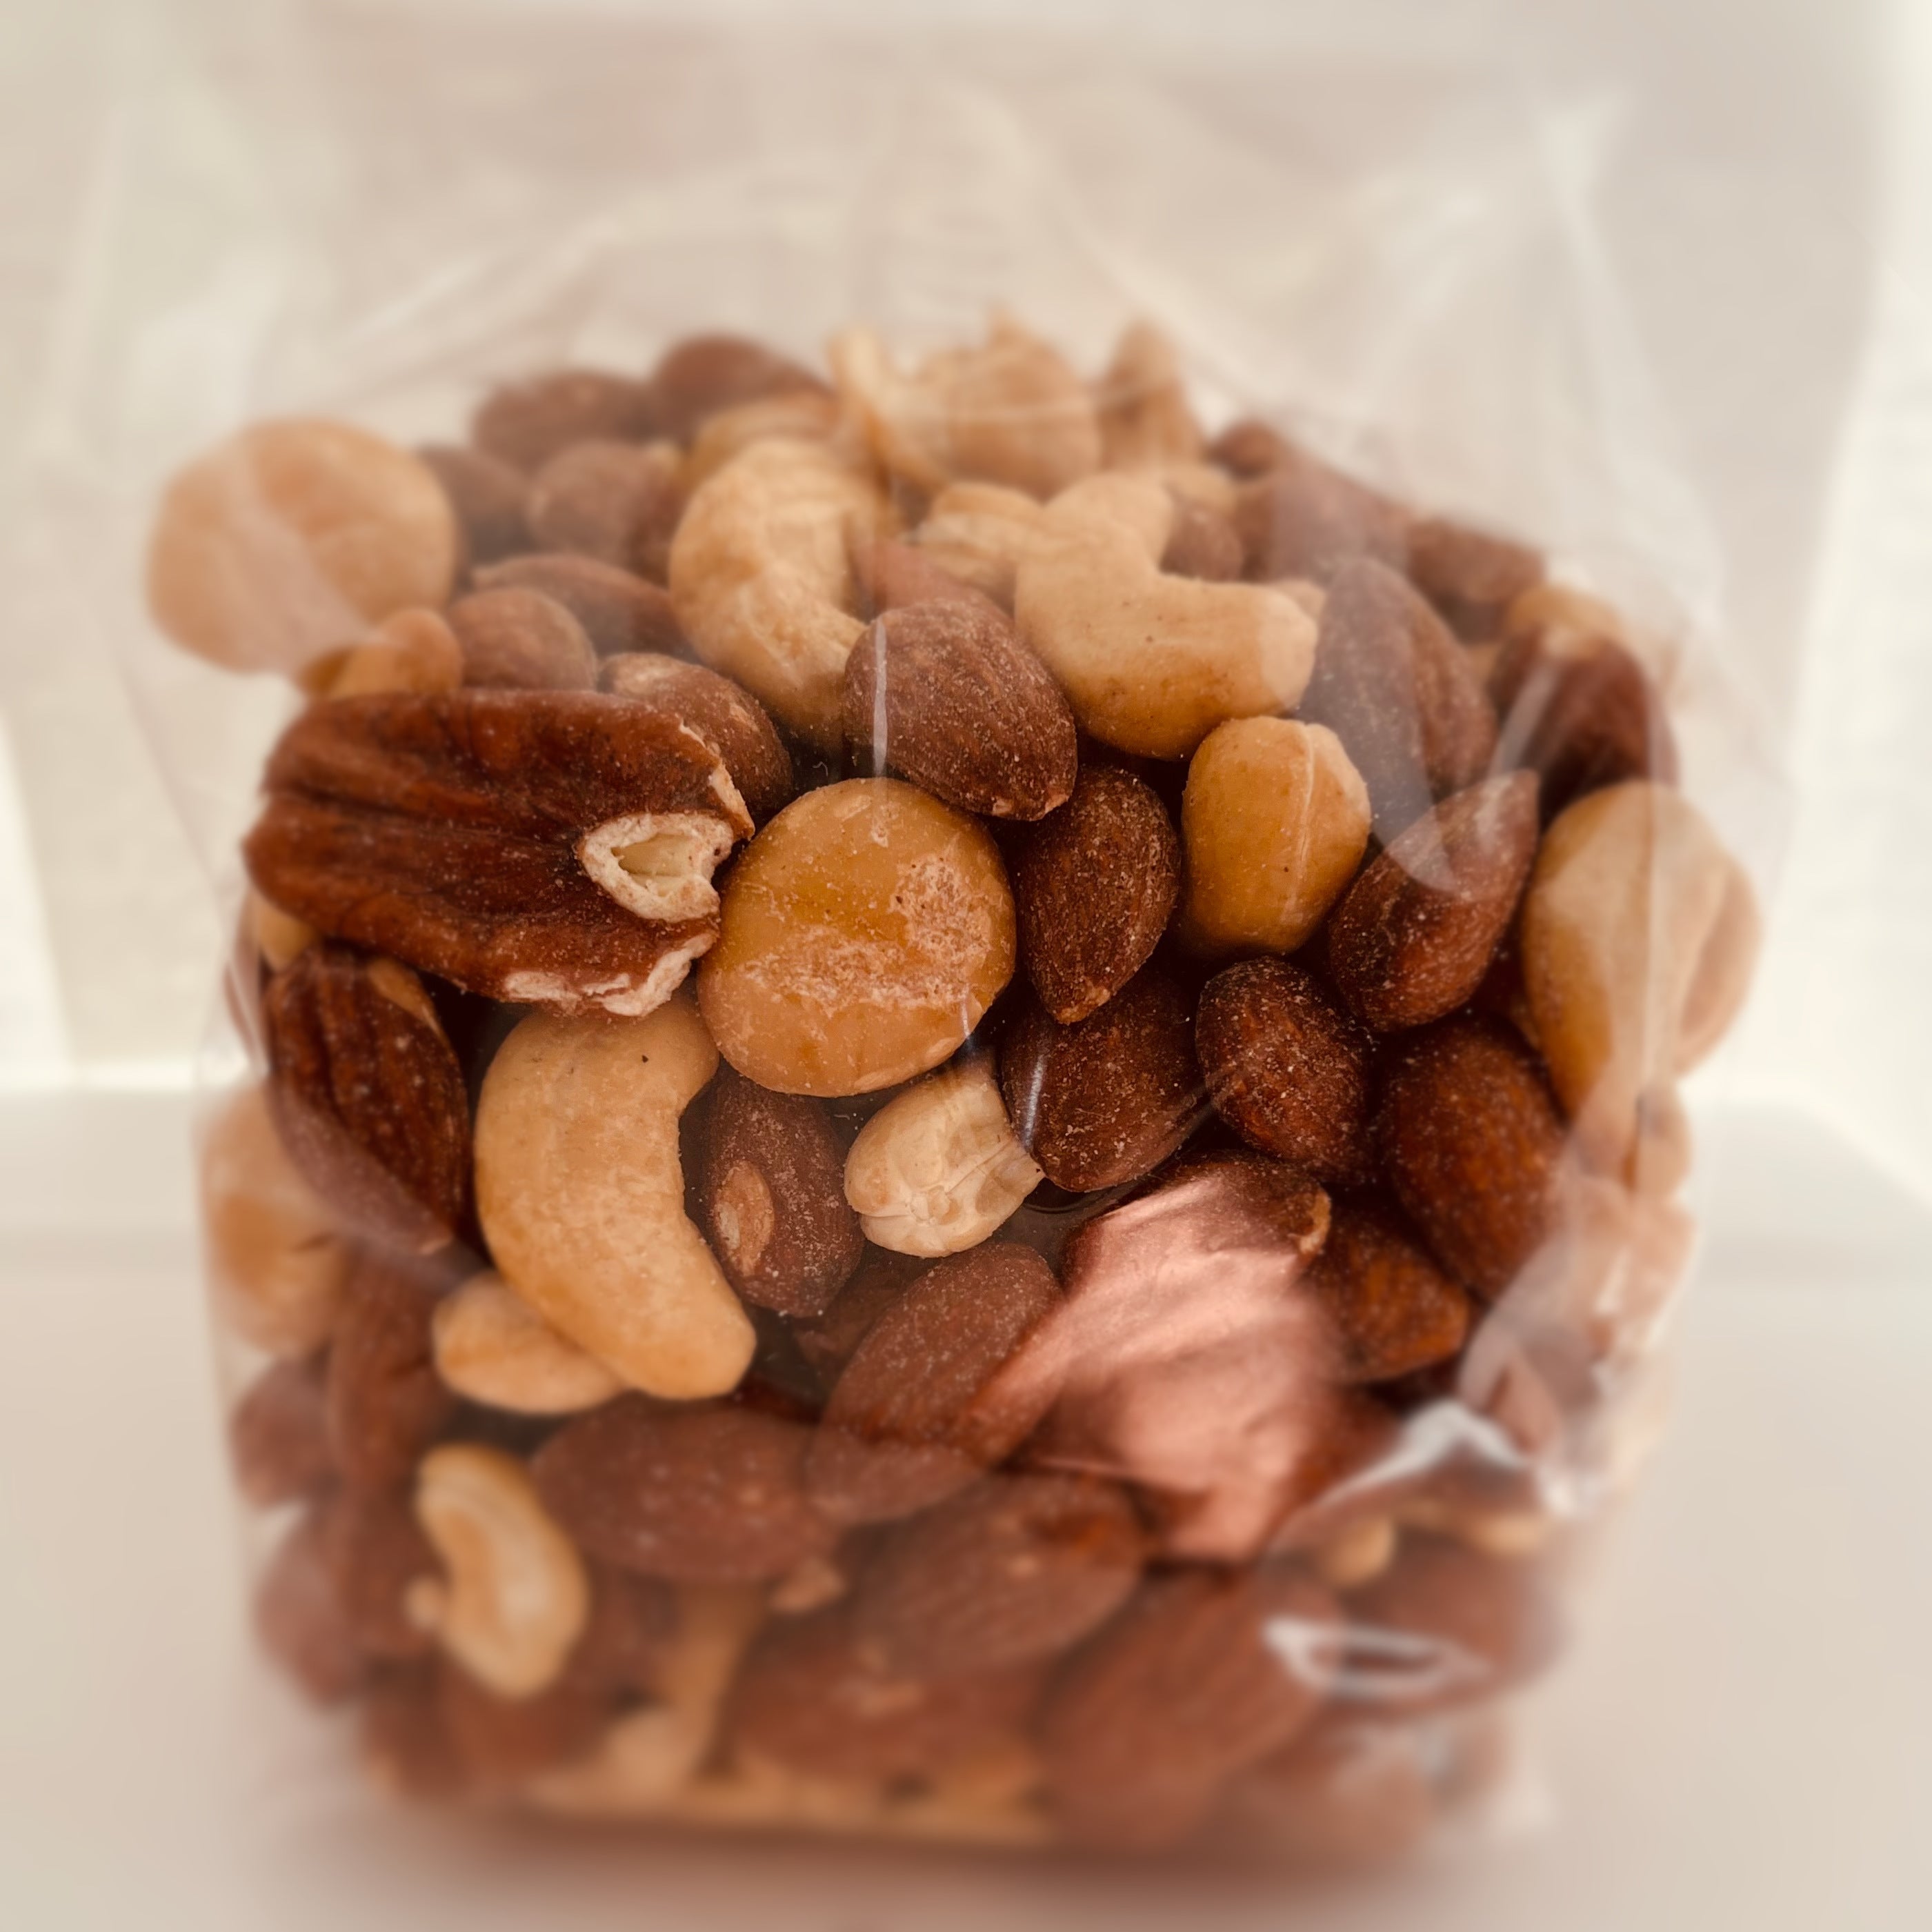 Roasted and Salted Tree Nuts 500g re-fill bag